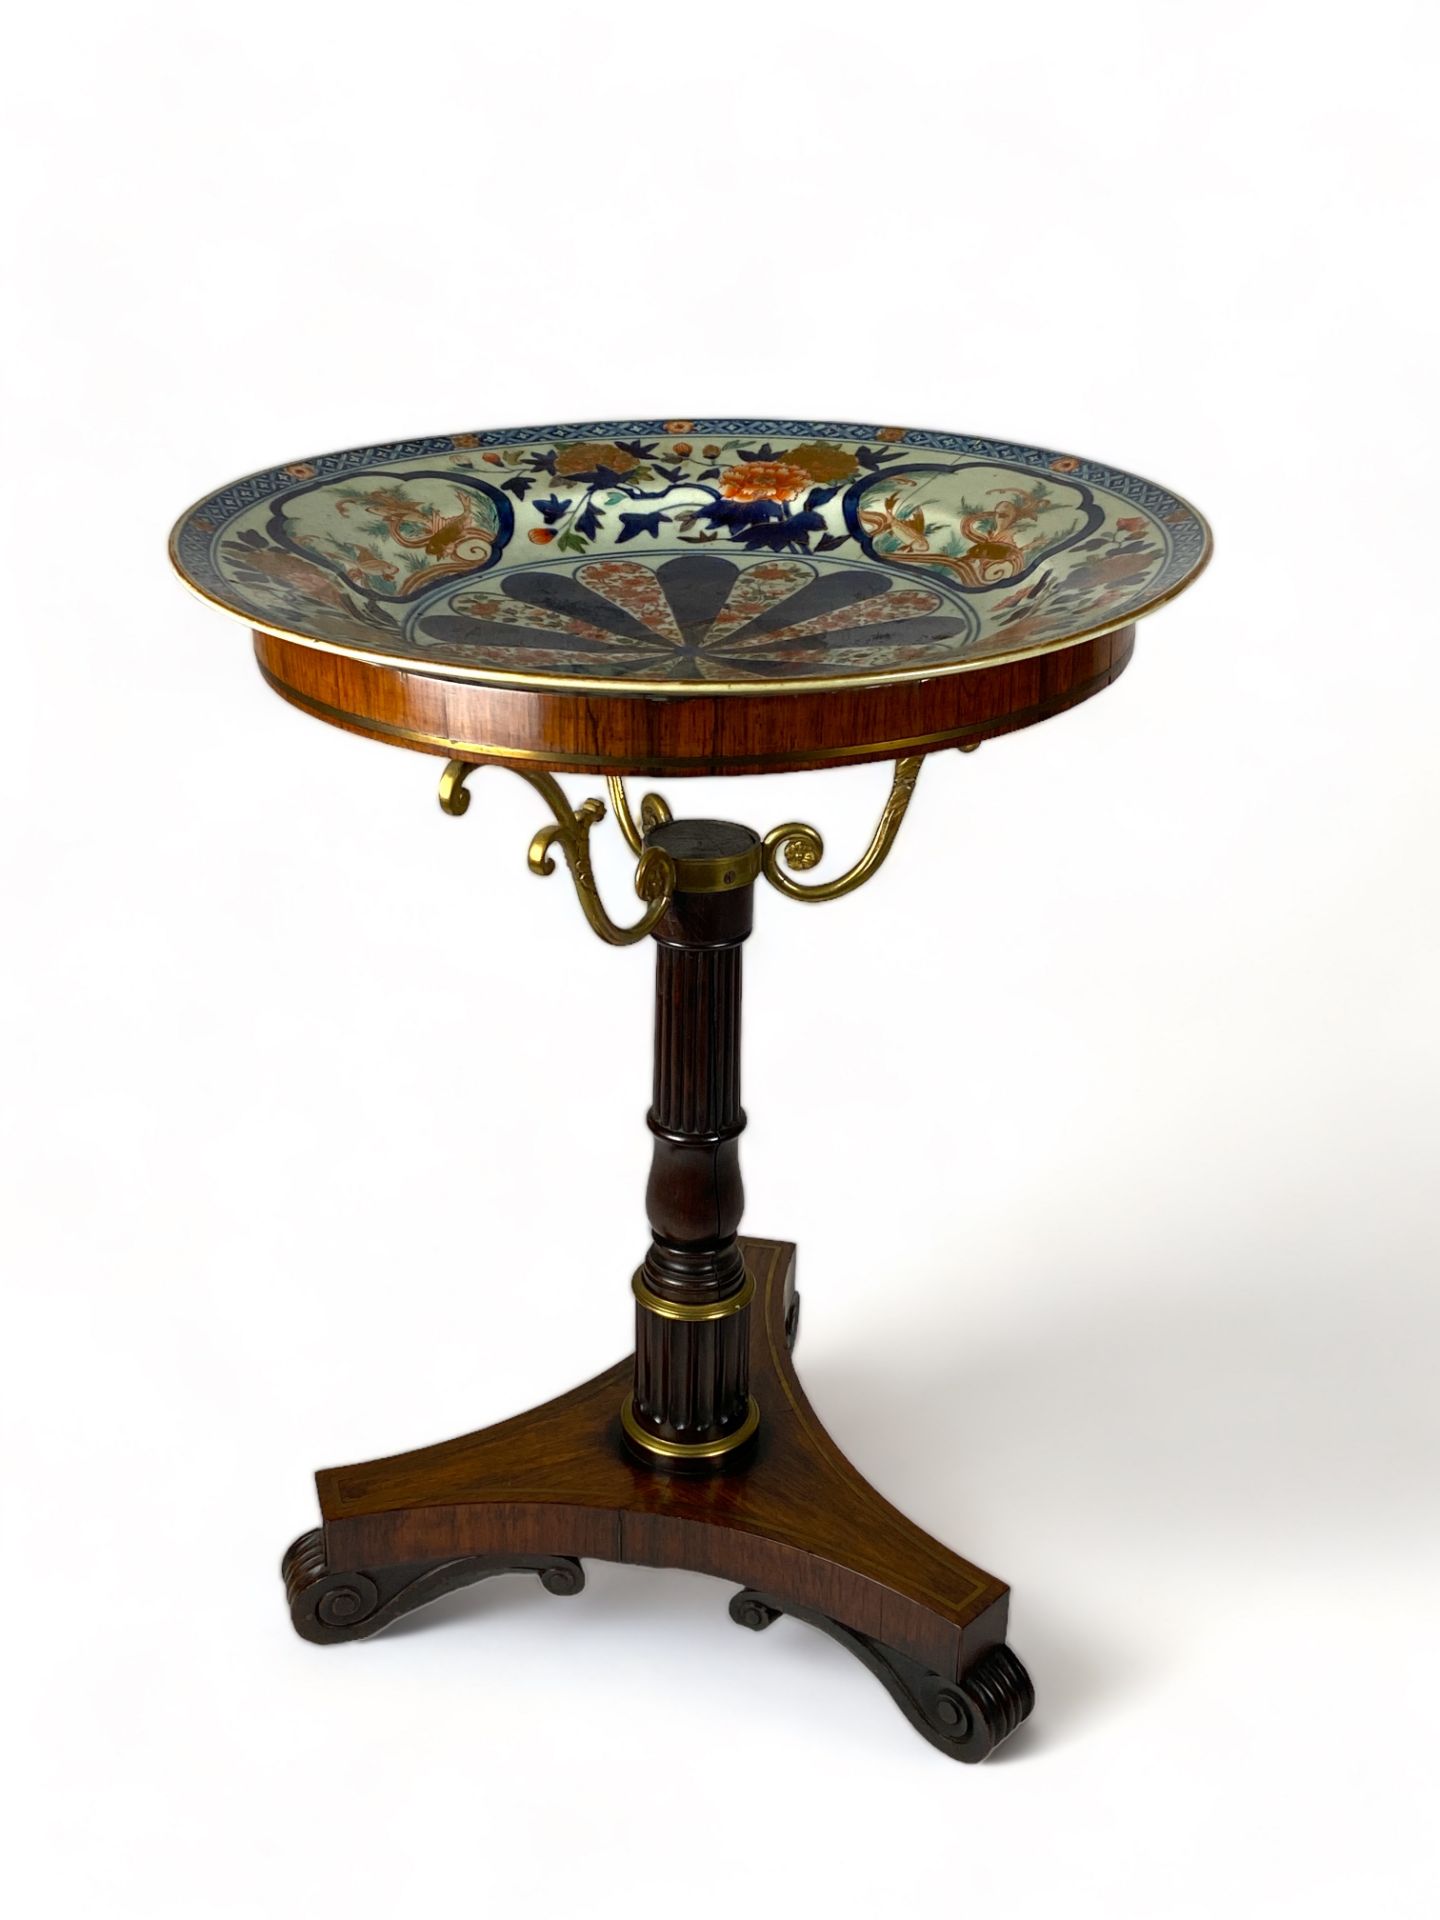 A Regency rosewood and gilt bronze mounted basin or jardiniere stand with and Edo period Imari dish